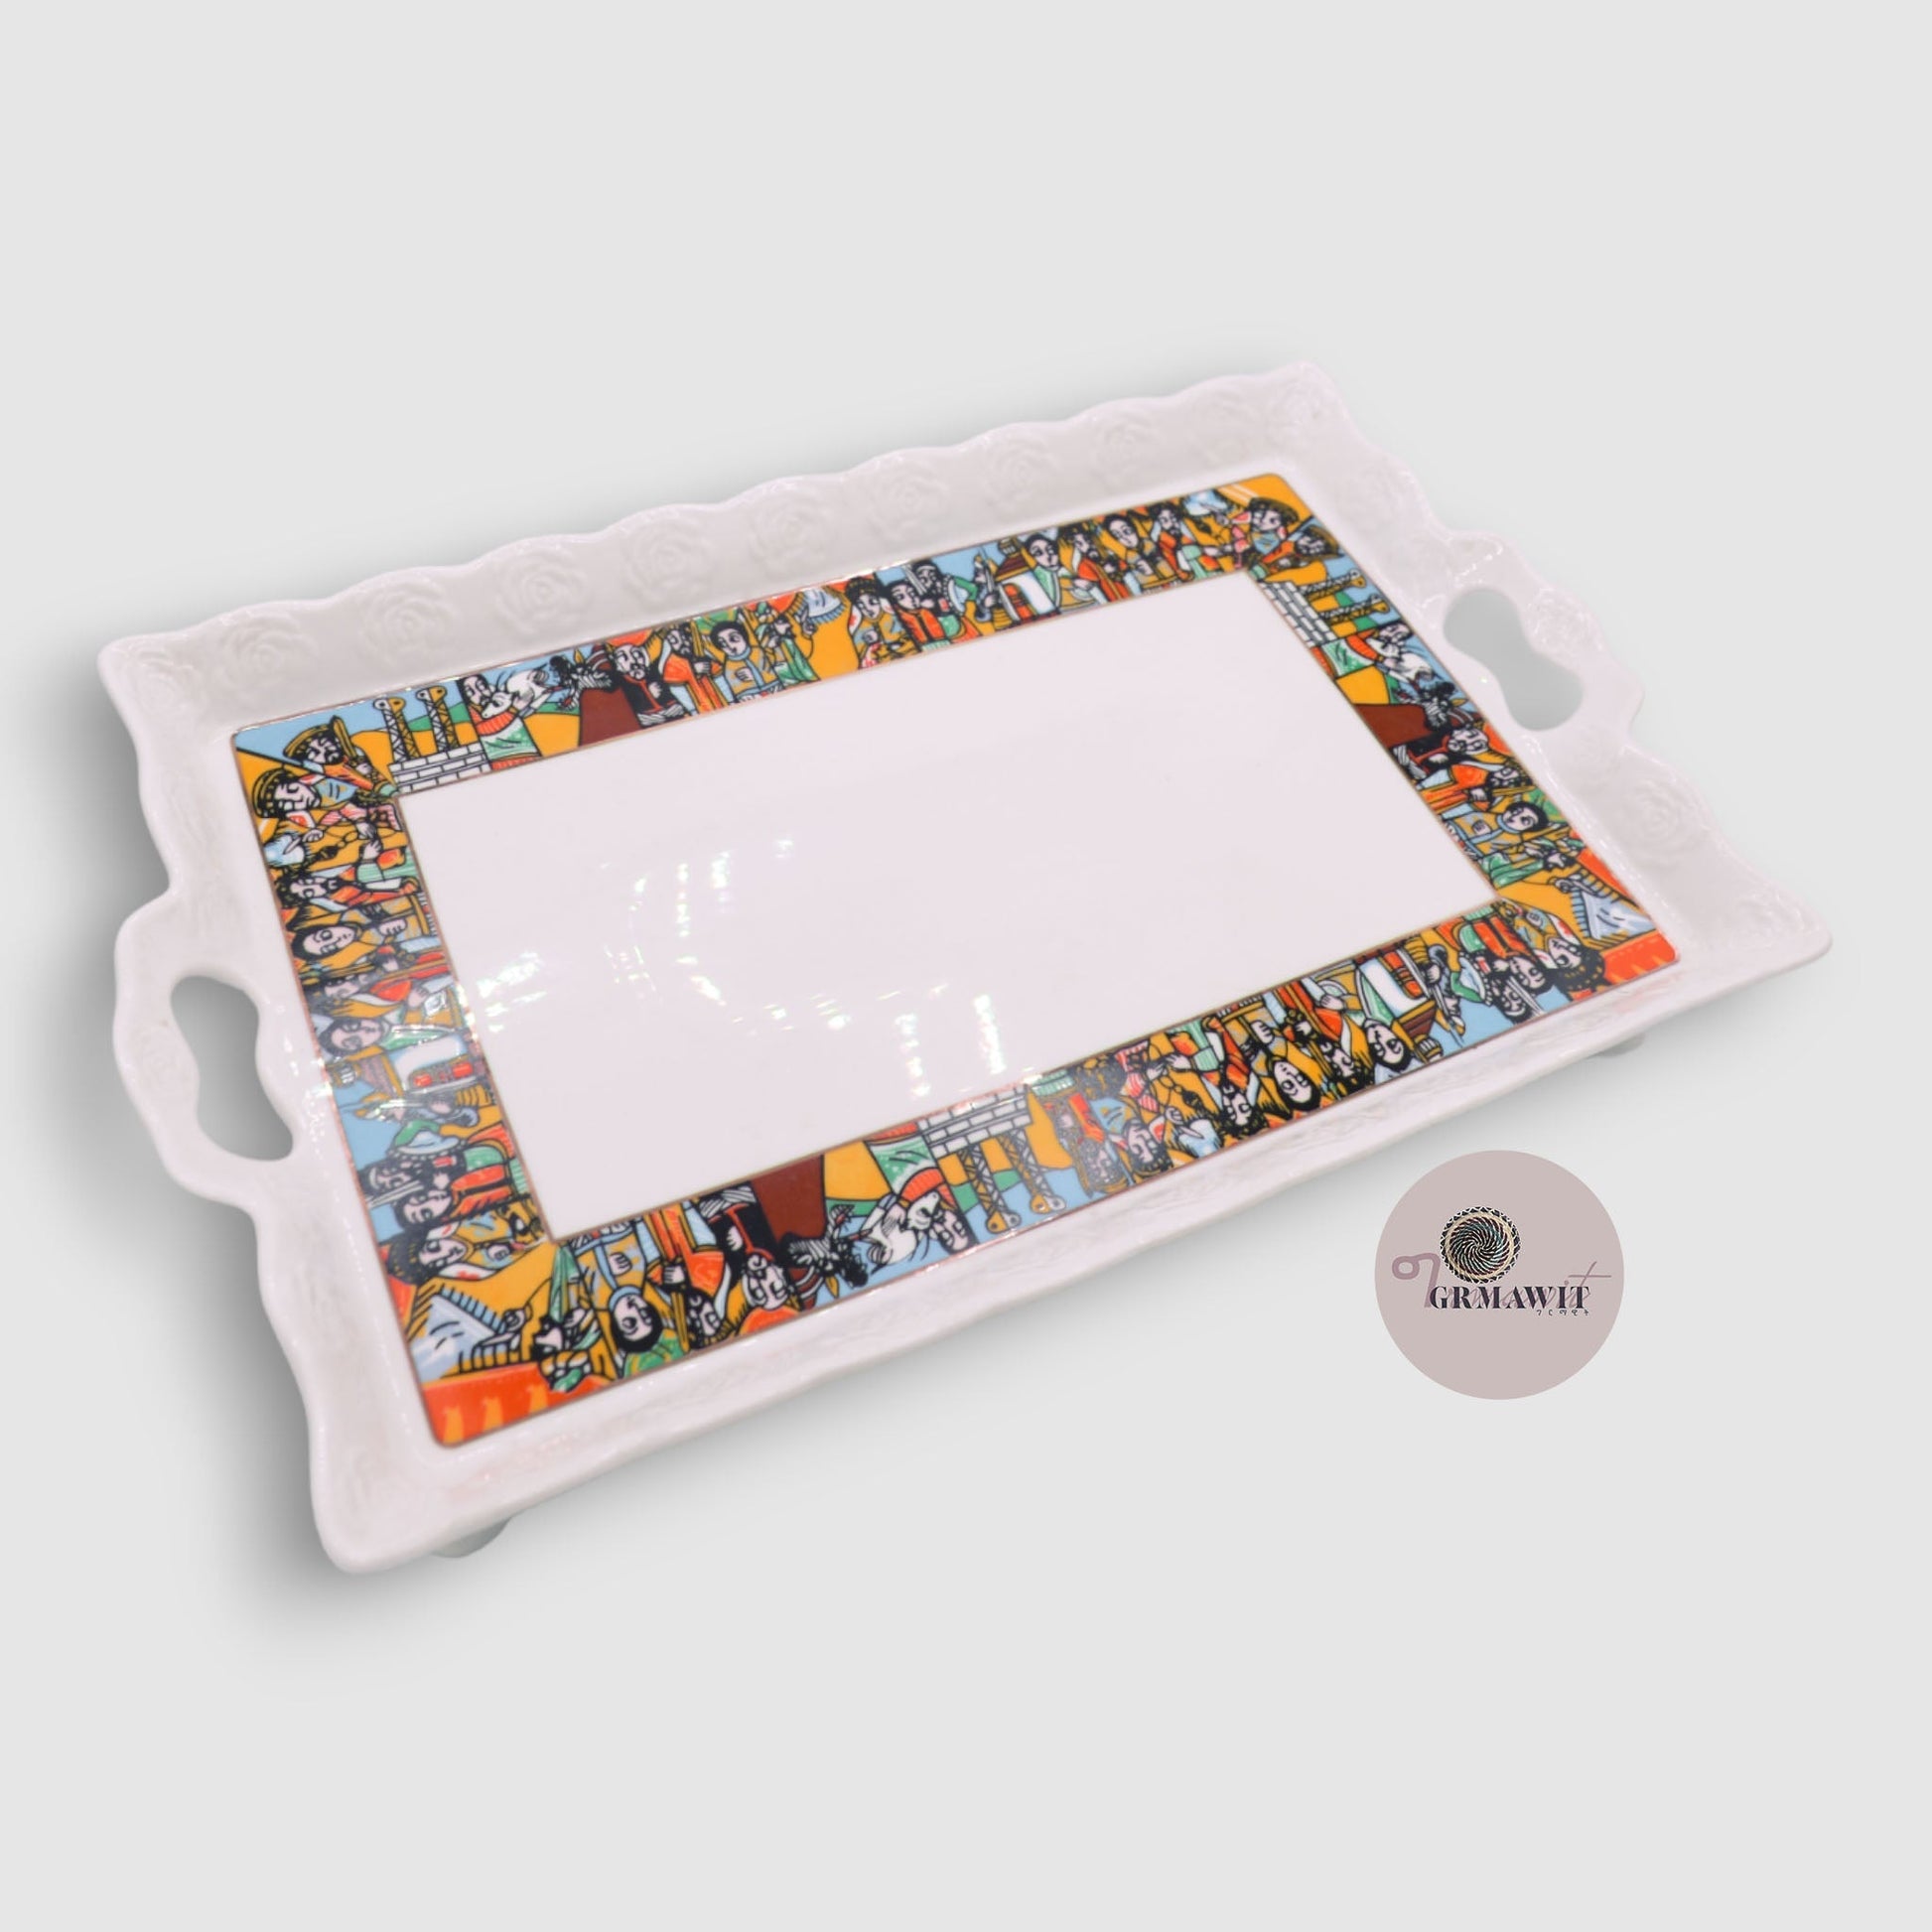 Traditional Ceramic Serving Tray | Zurya Tlet Extras Grmawit 